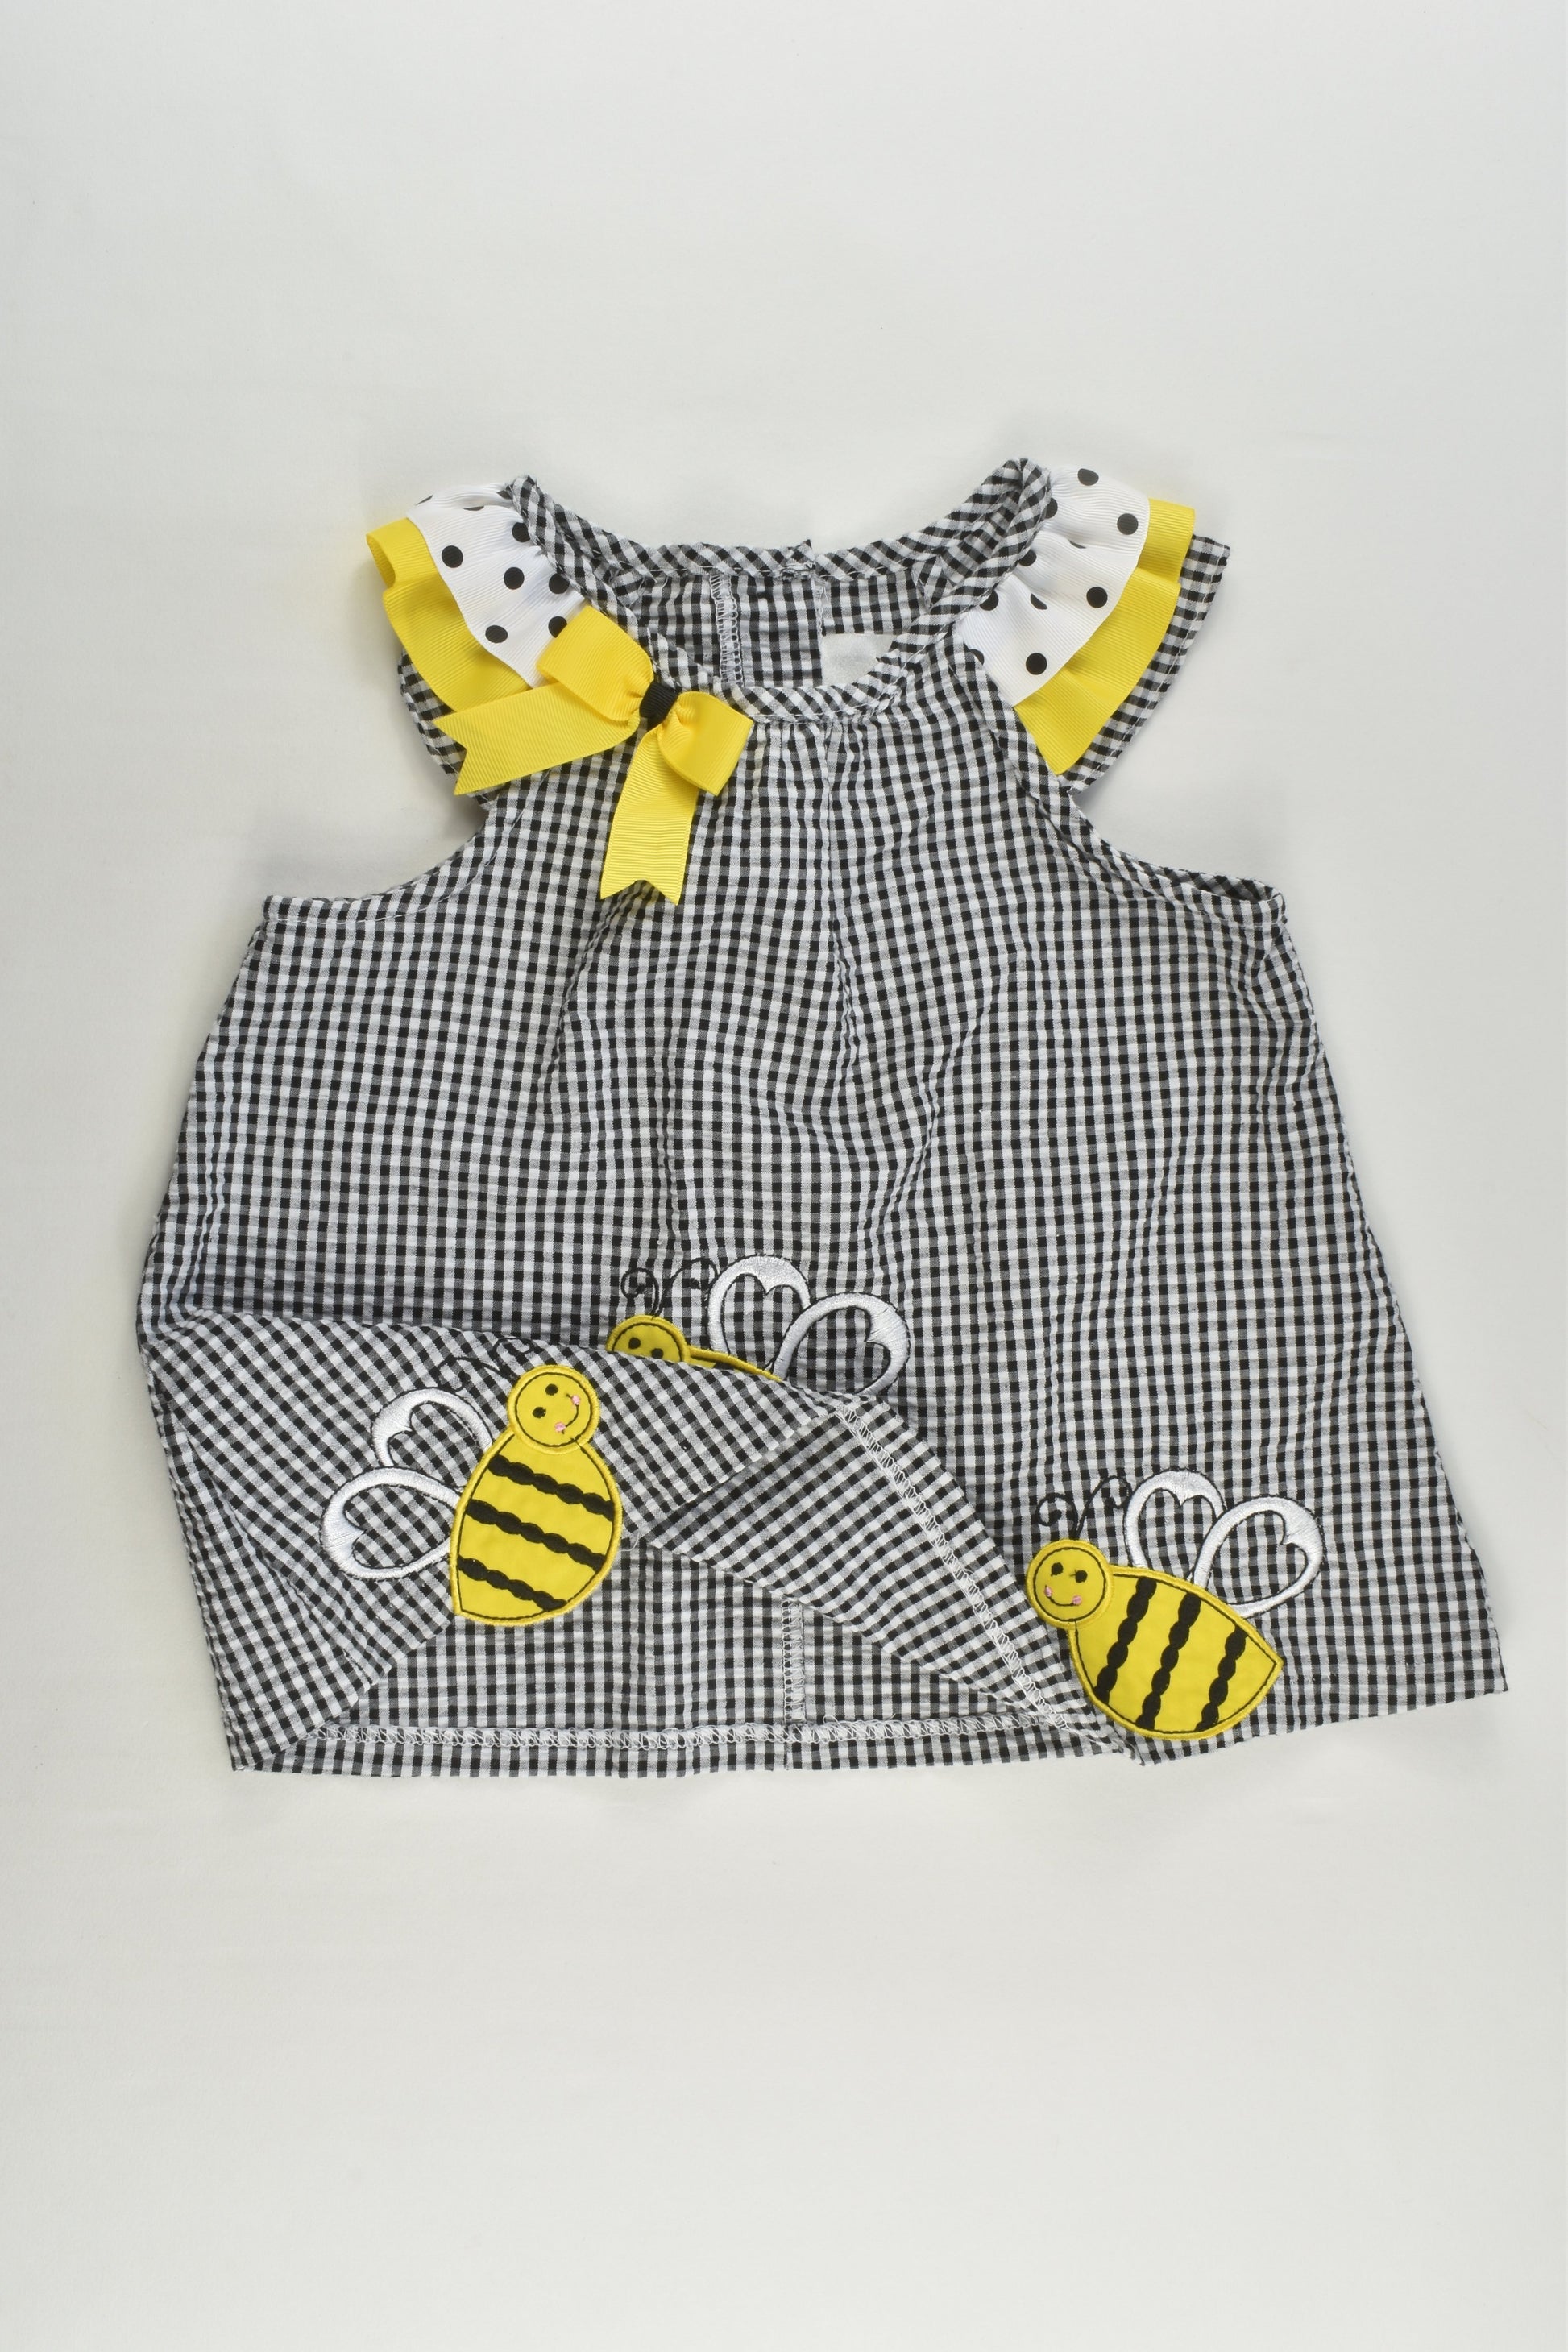 NEW Rare Editions Size 1-2 (24 months) Bumble Bees Tunic/Dress